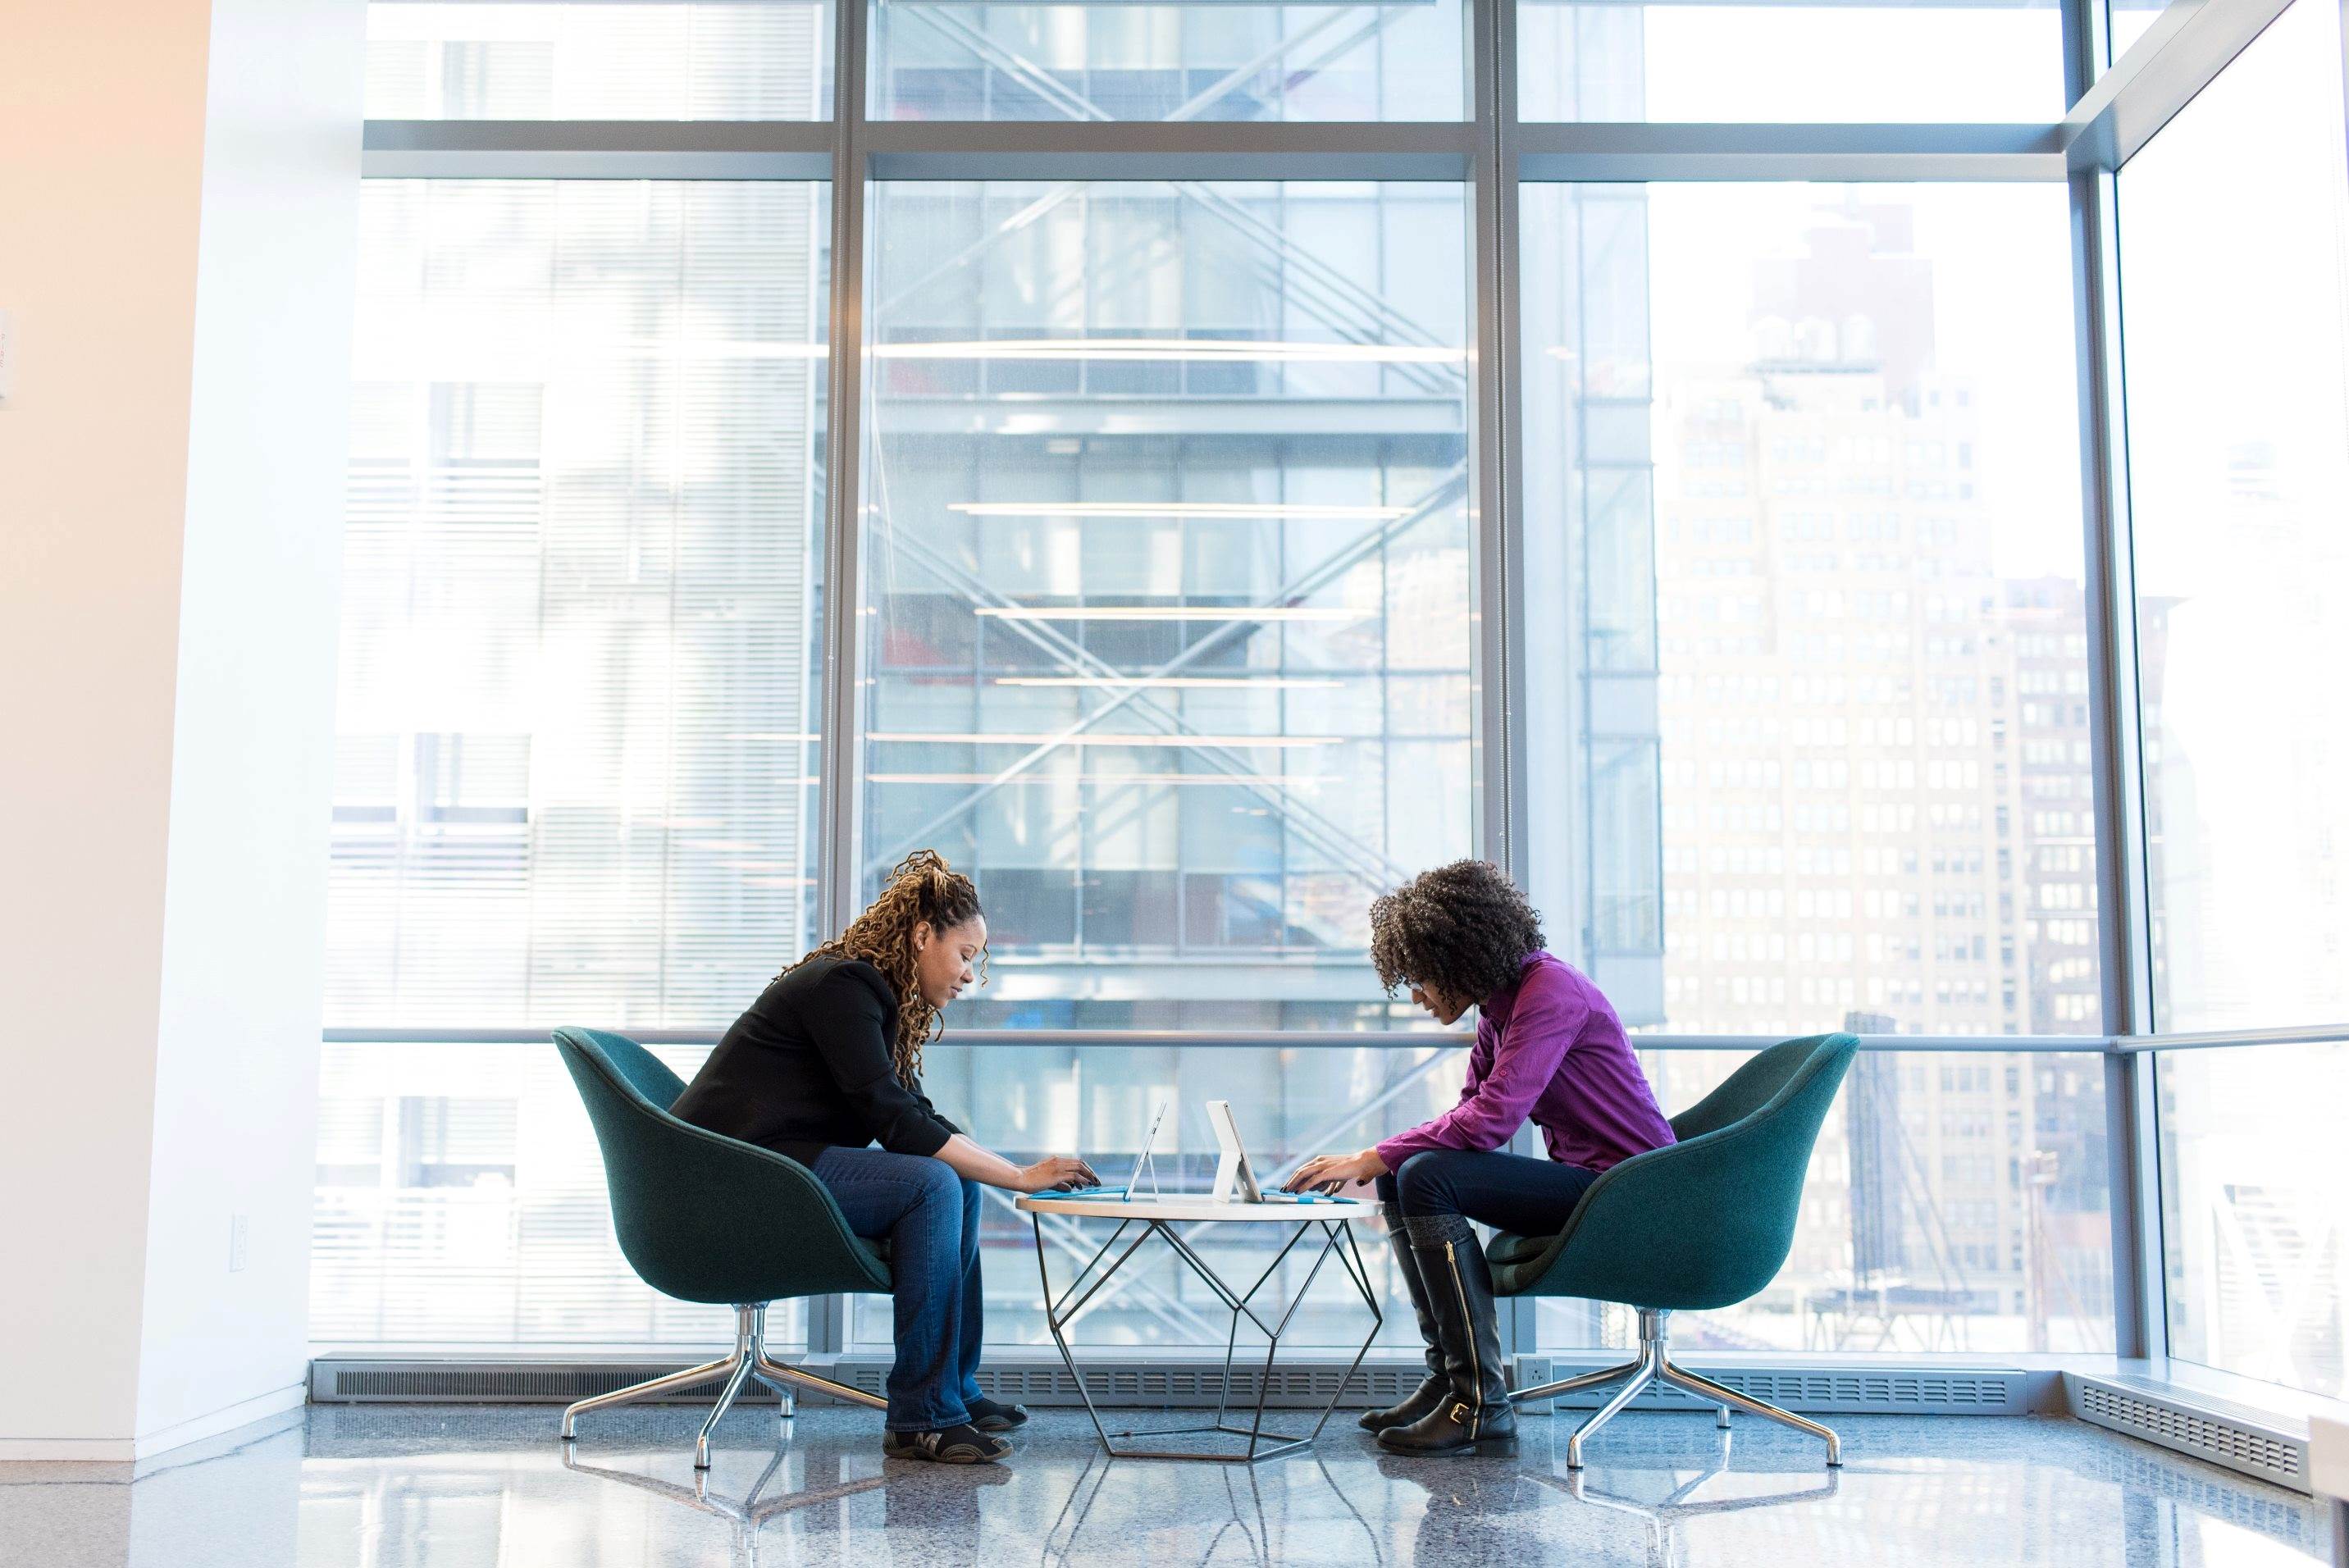 Two people at a large office window